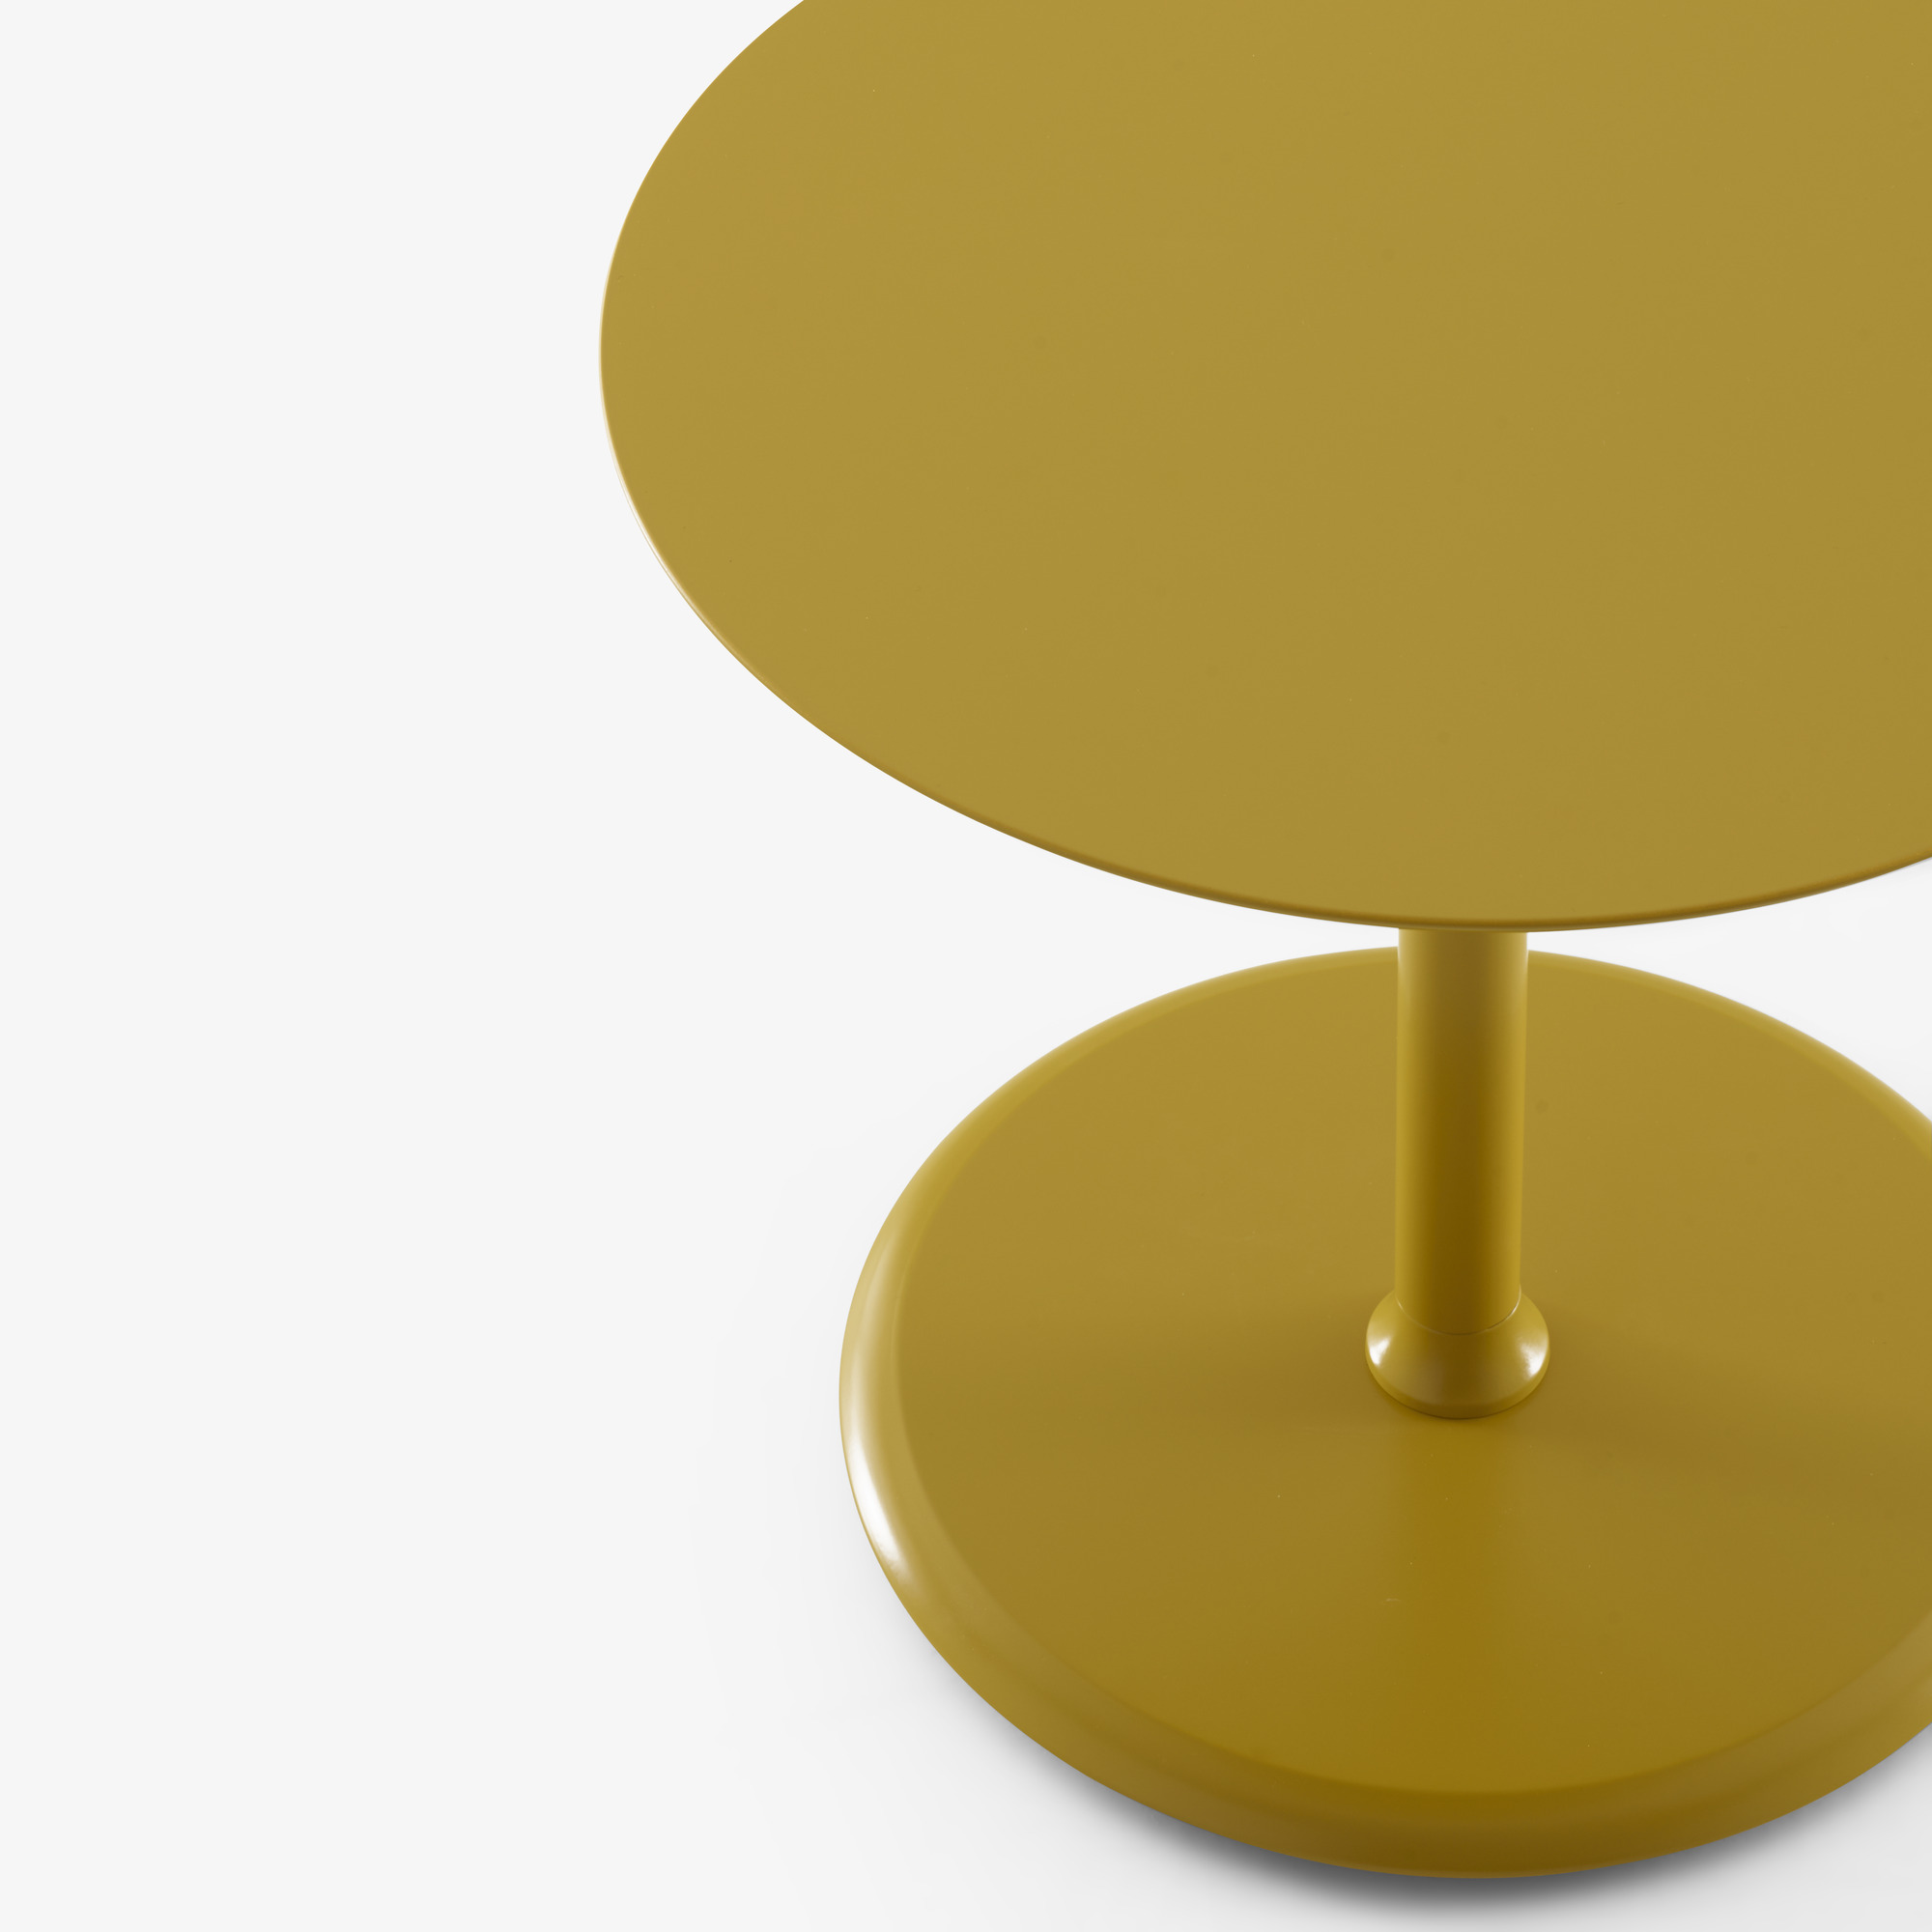 Image Pedestal table with two surfaces 3